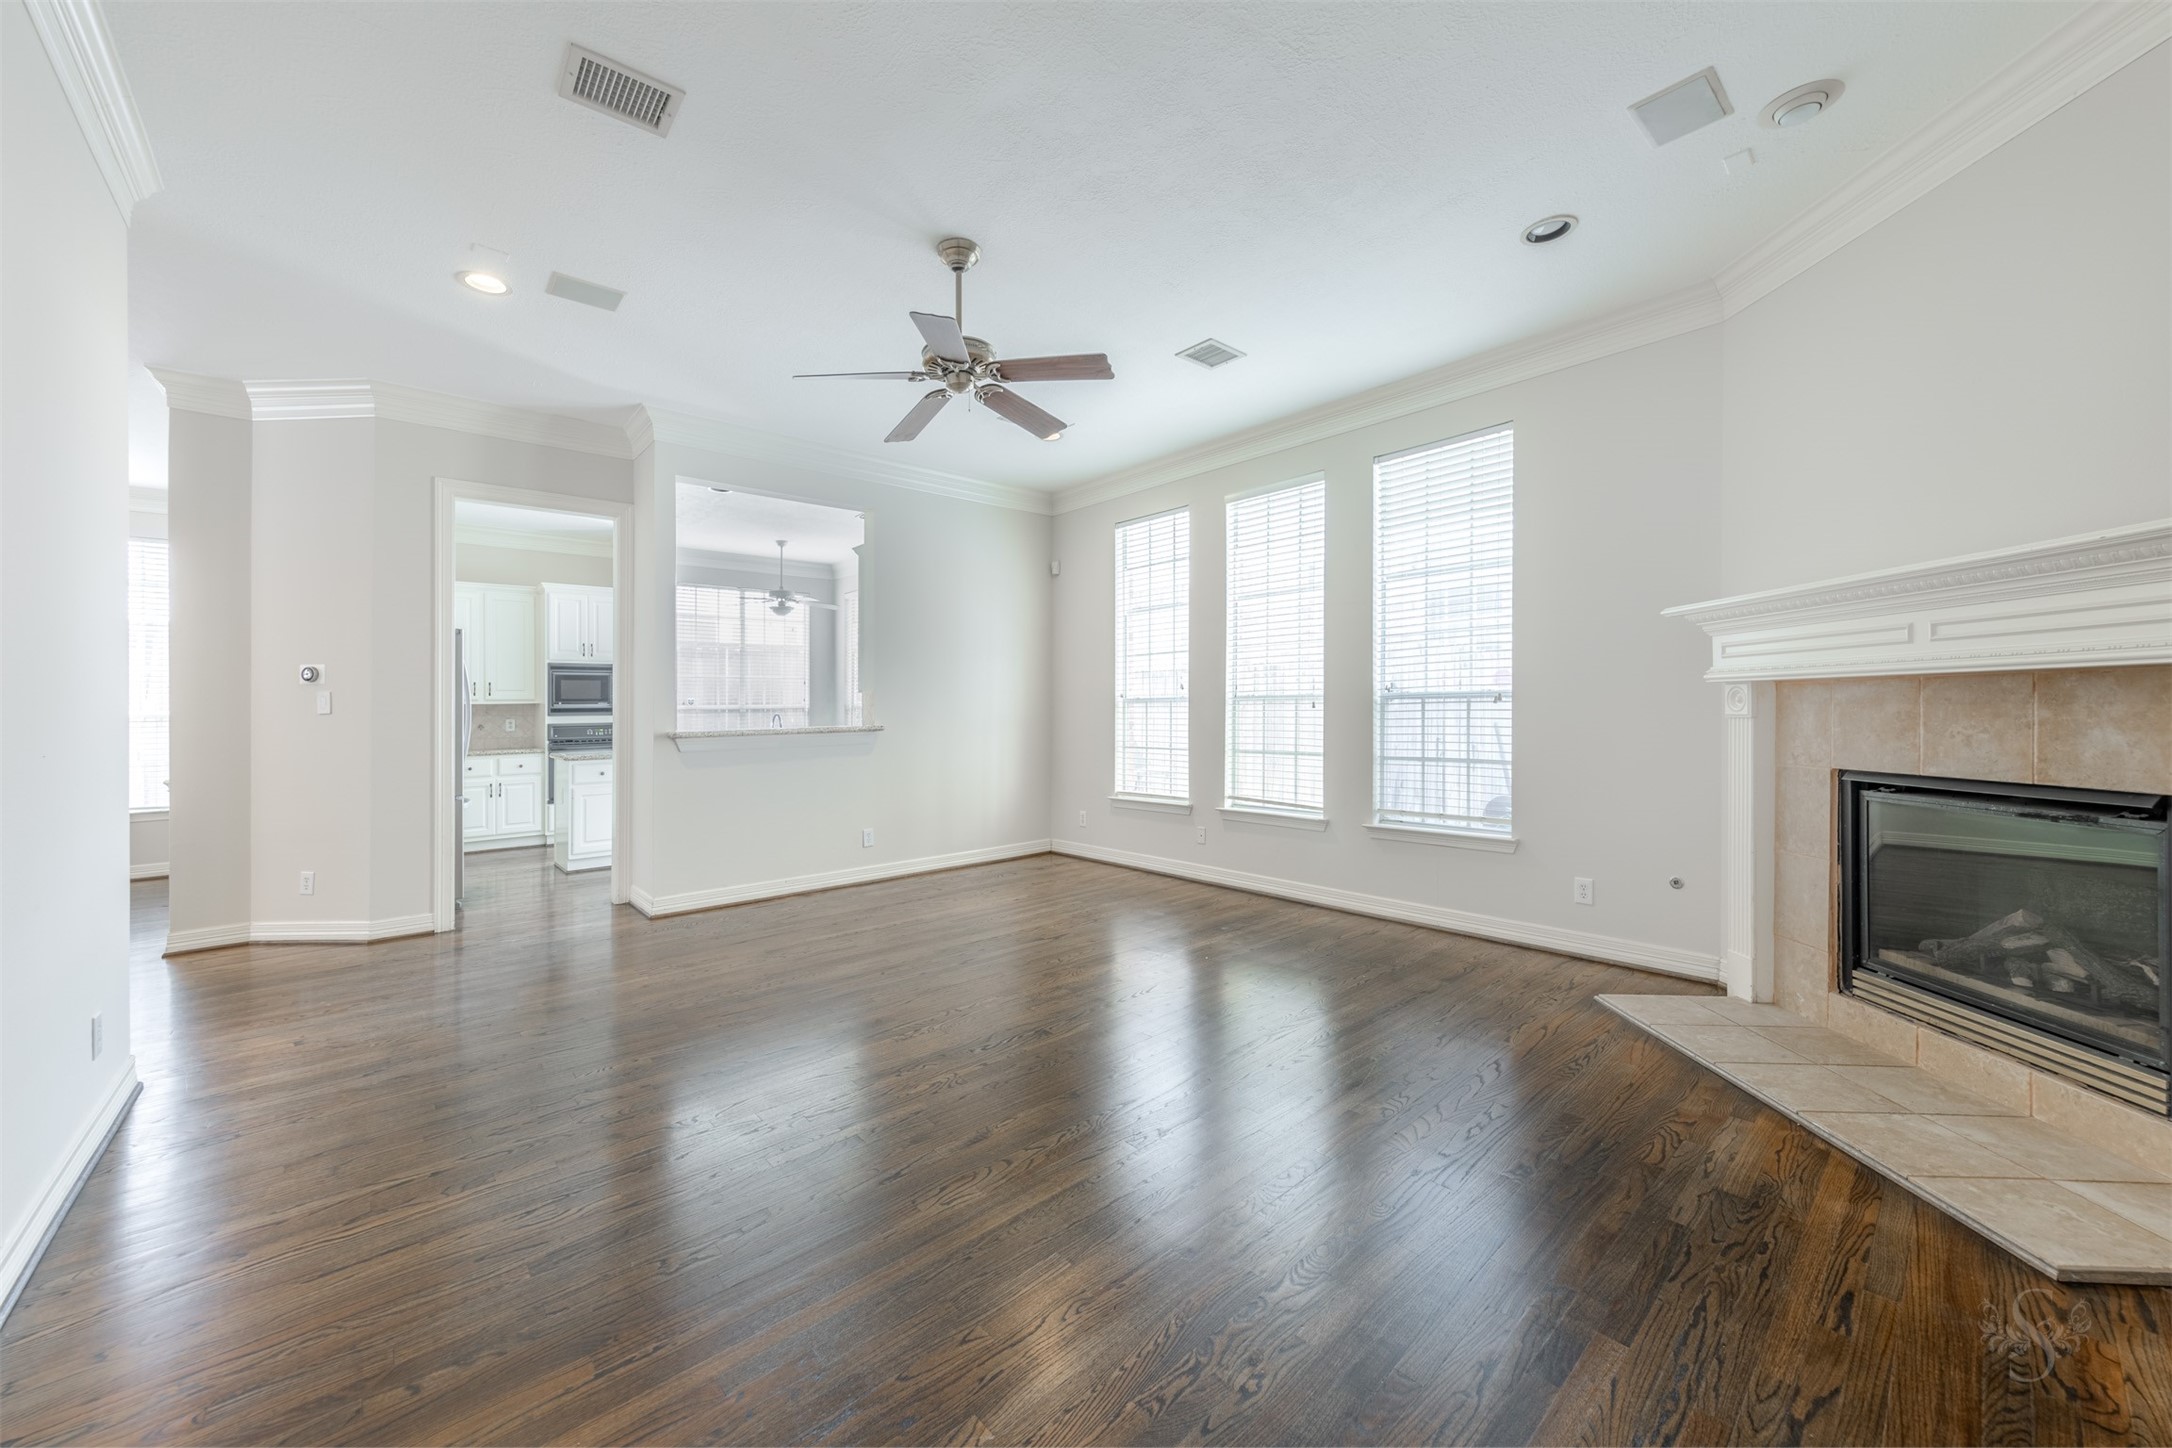 This inviting family room provides a lovely gathering place for your family and friends! Featuring high ceilings, wood flooring, fireplace & mantel and wall of windows bringing in lots of natural light!